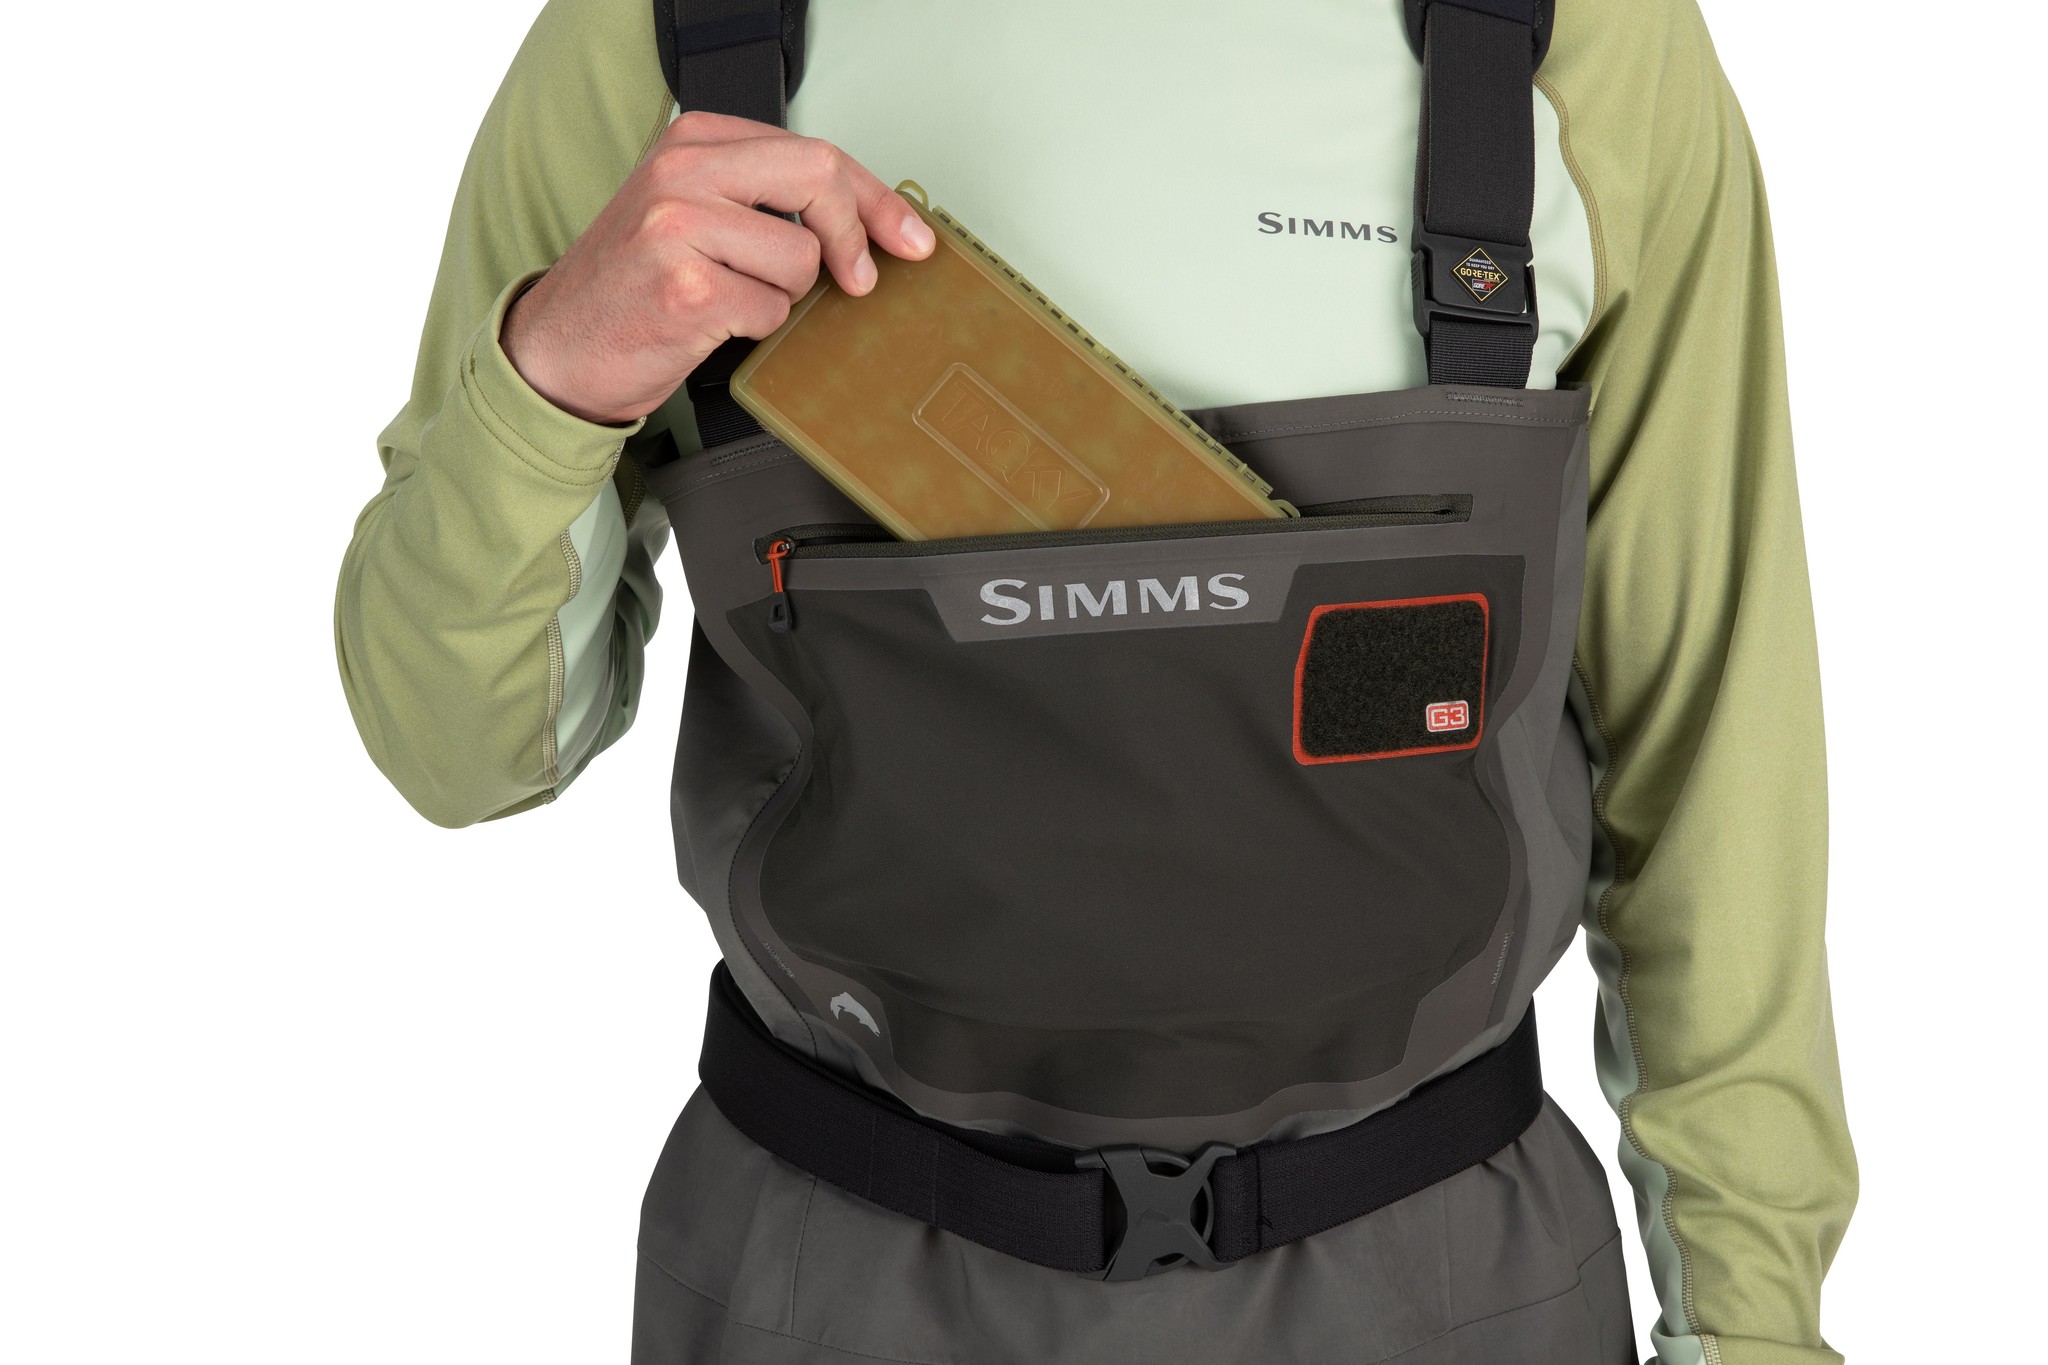 SIMMS SIMMS G3 GUIDE STOCKINGFOOT WADERS - NEW FOR 2022!